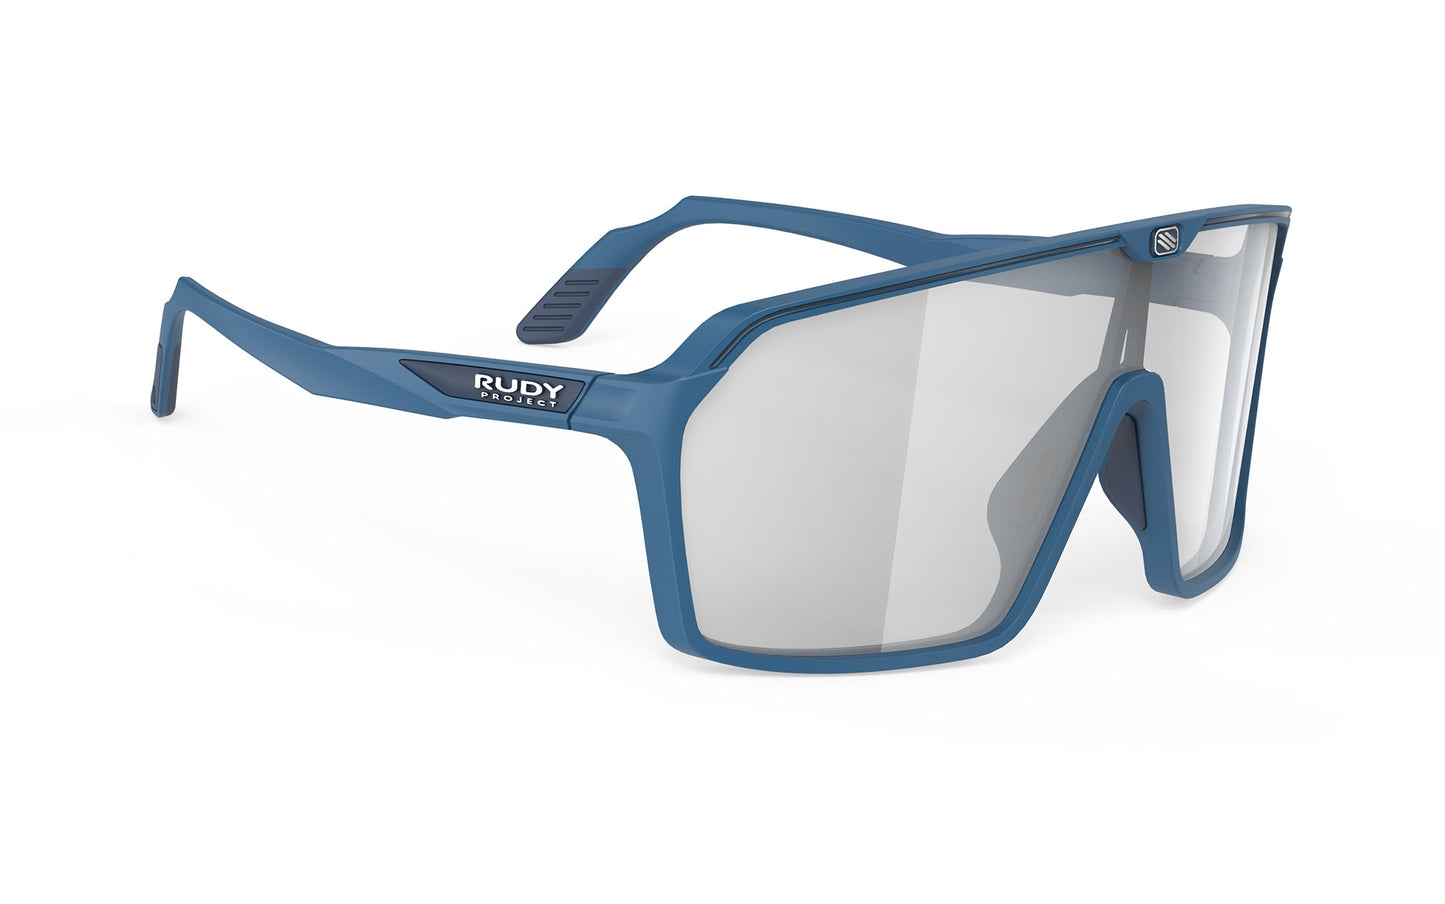 Rudy Project Spinshield Pacific Blue - Impactx Photochromic 2 Laser Black Sunglasses